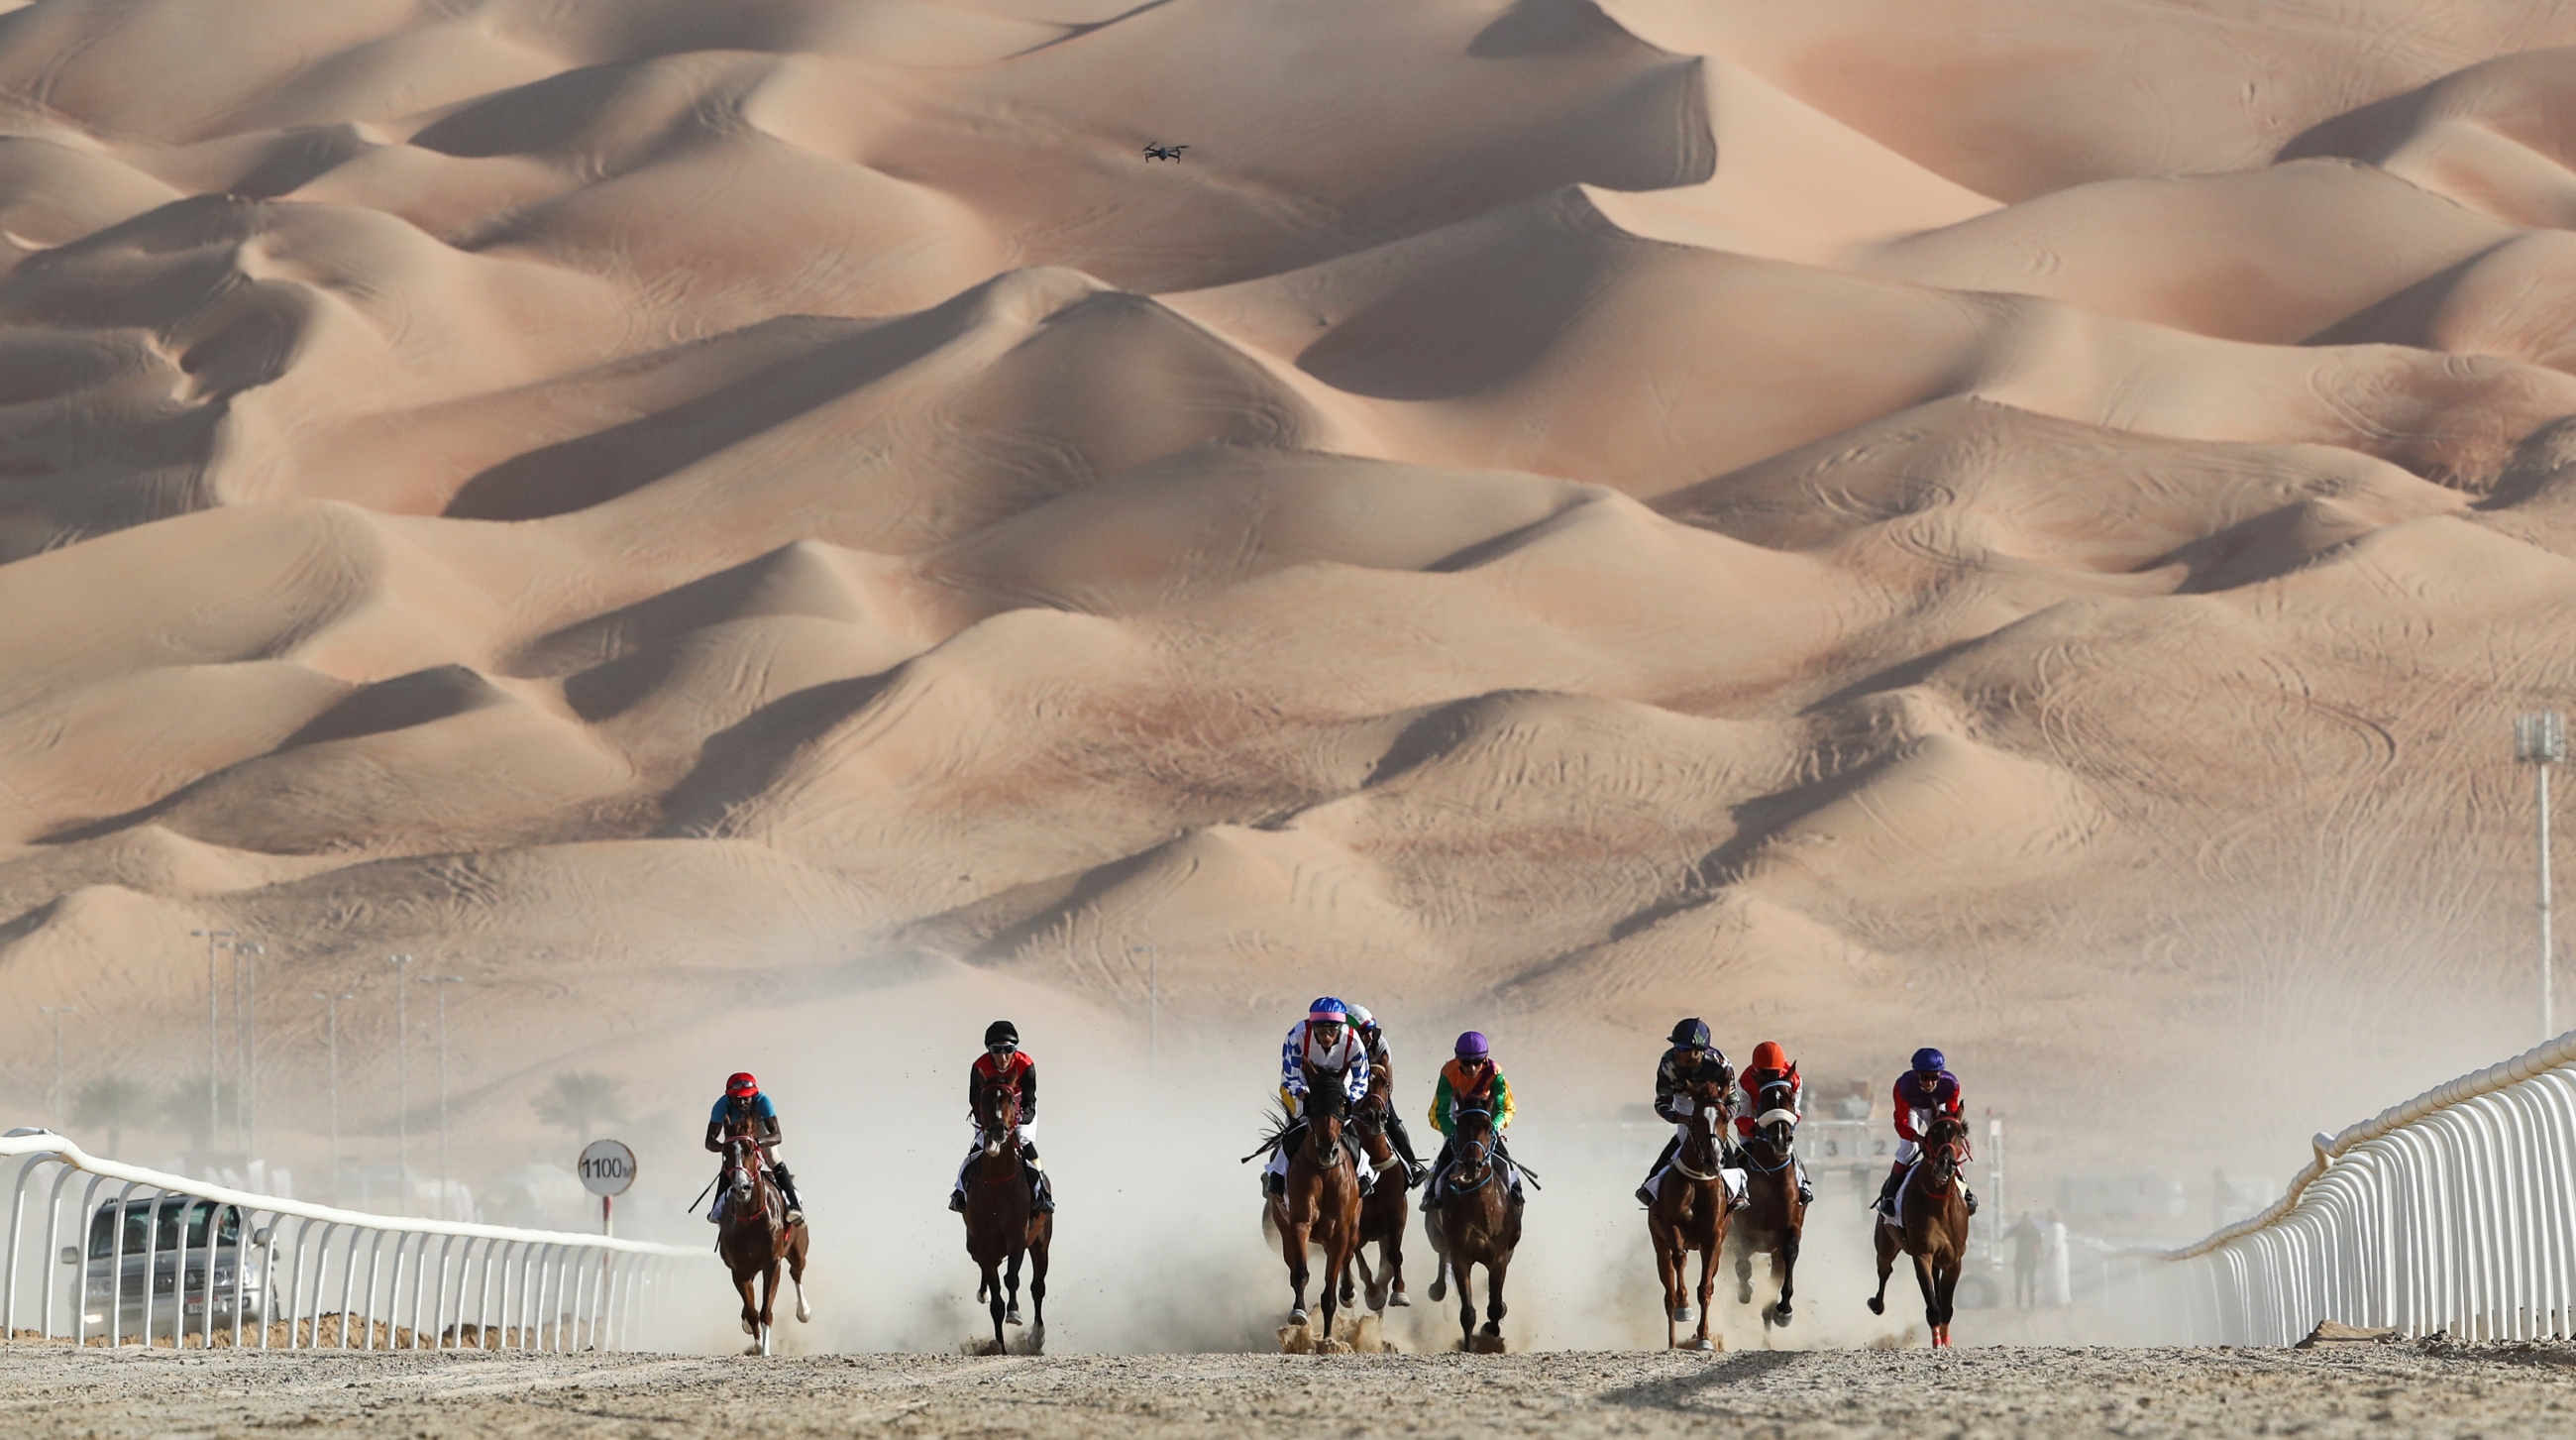 Aside from camel competitions, other sports at the festival include horse racing, which still feature human jockeys rather than their robotic equivalents (AFP)